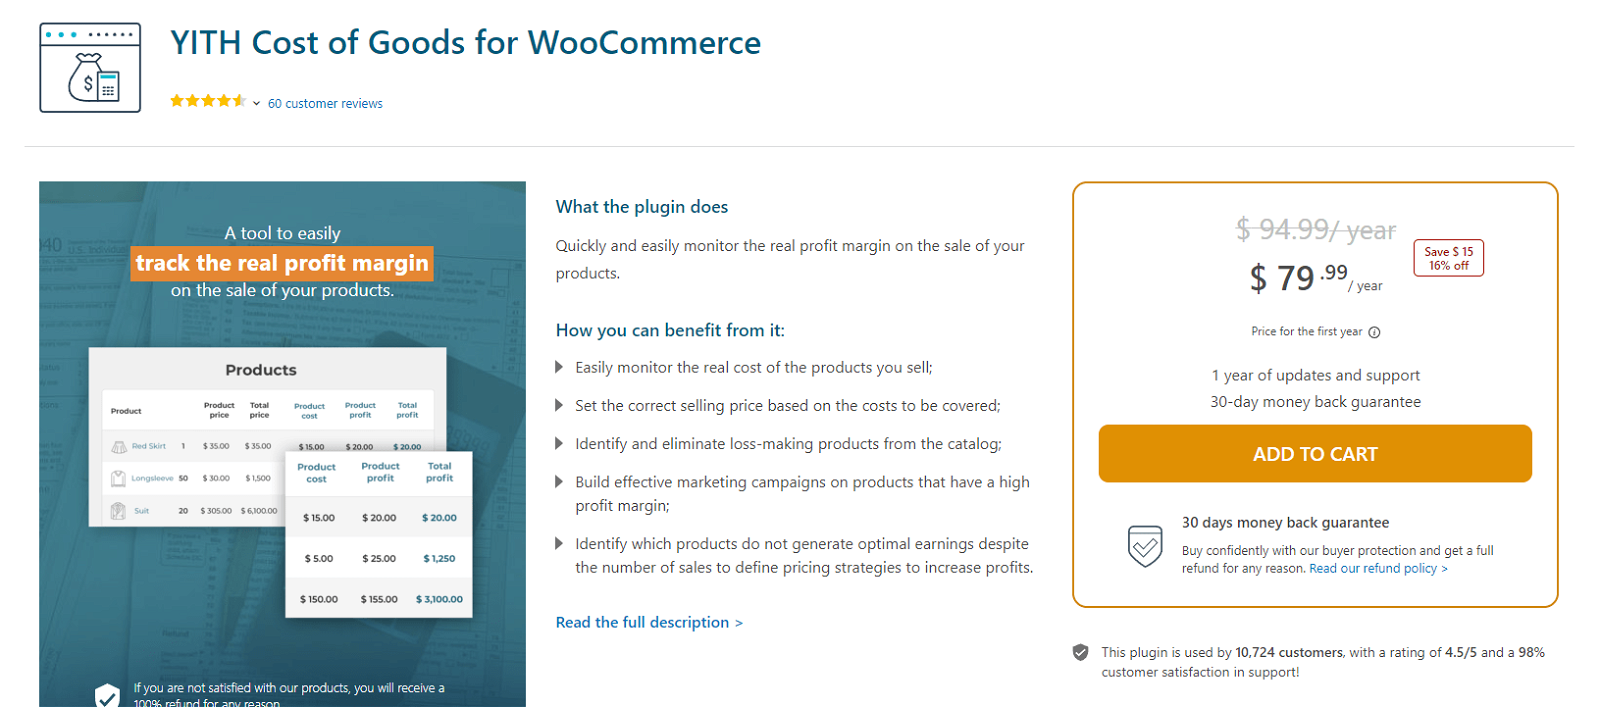 YITH Cost of Goods for WooCommerce Plugin